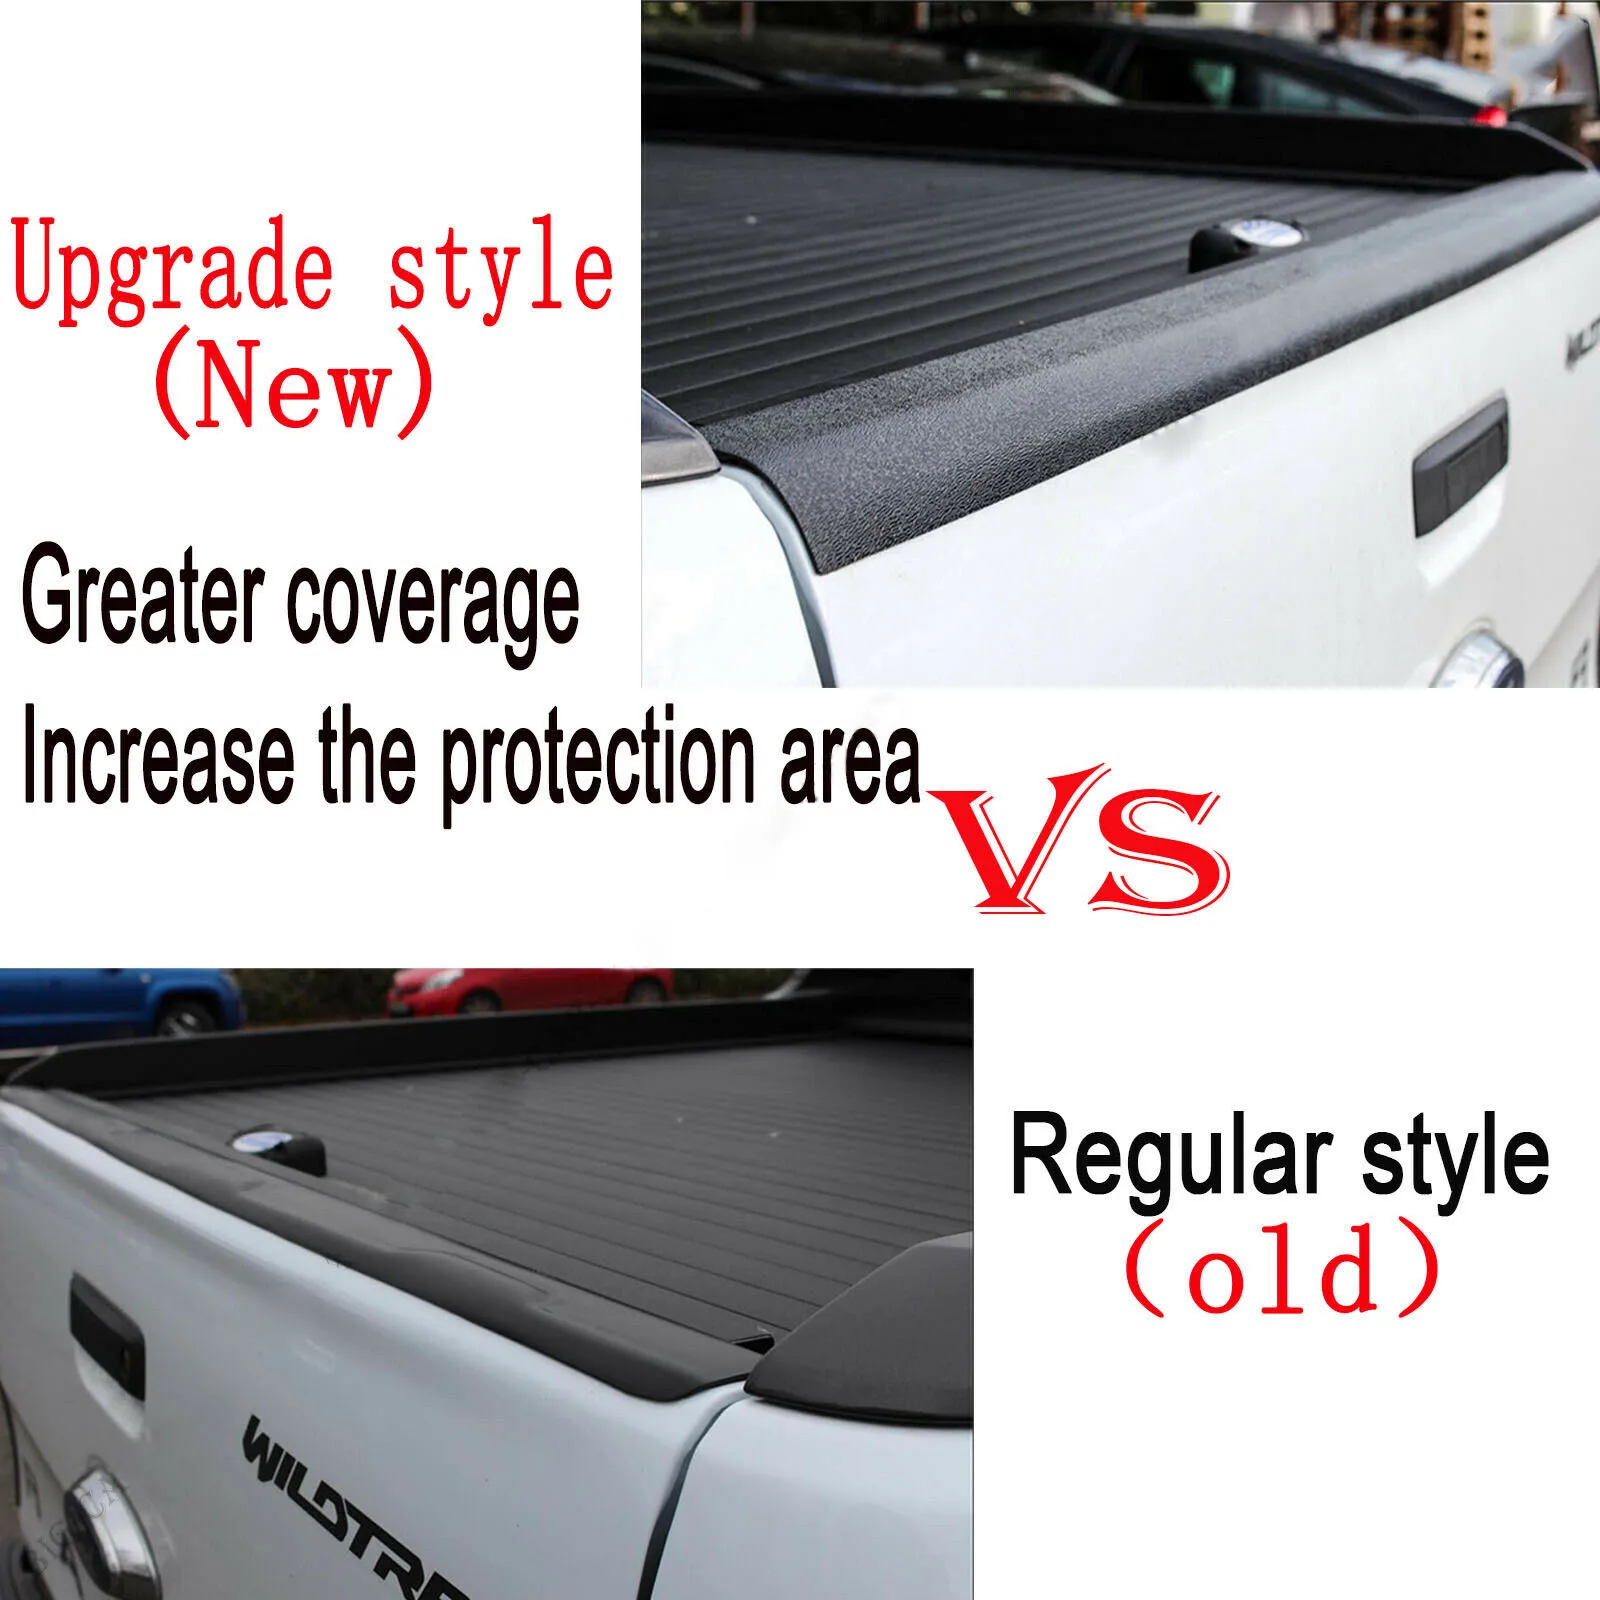 TAIL GATE TRUCK TRIM FOR FORD RANGER 2012 2013 2014 WILDTRAK XS XL PX PX2 PX3 XLT XLS T6 enlarge